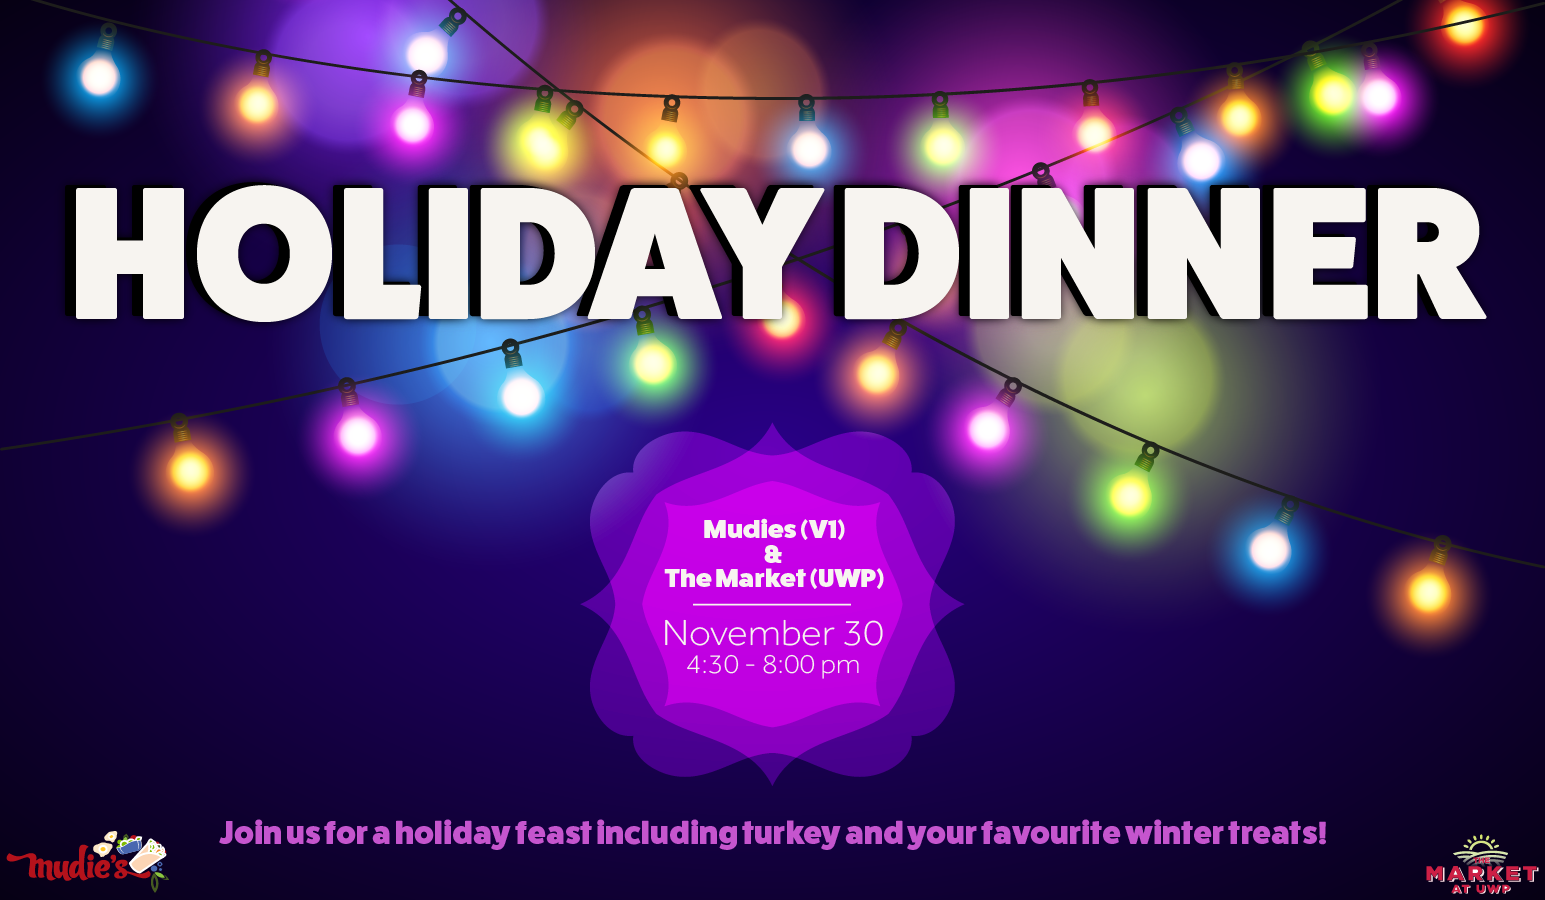 Holiday dinner poster